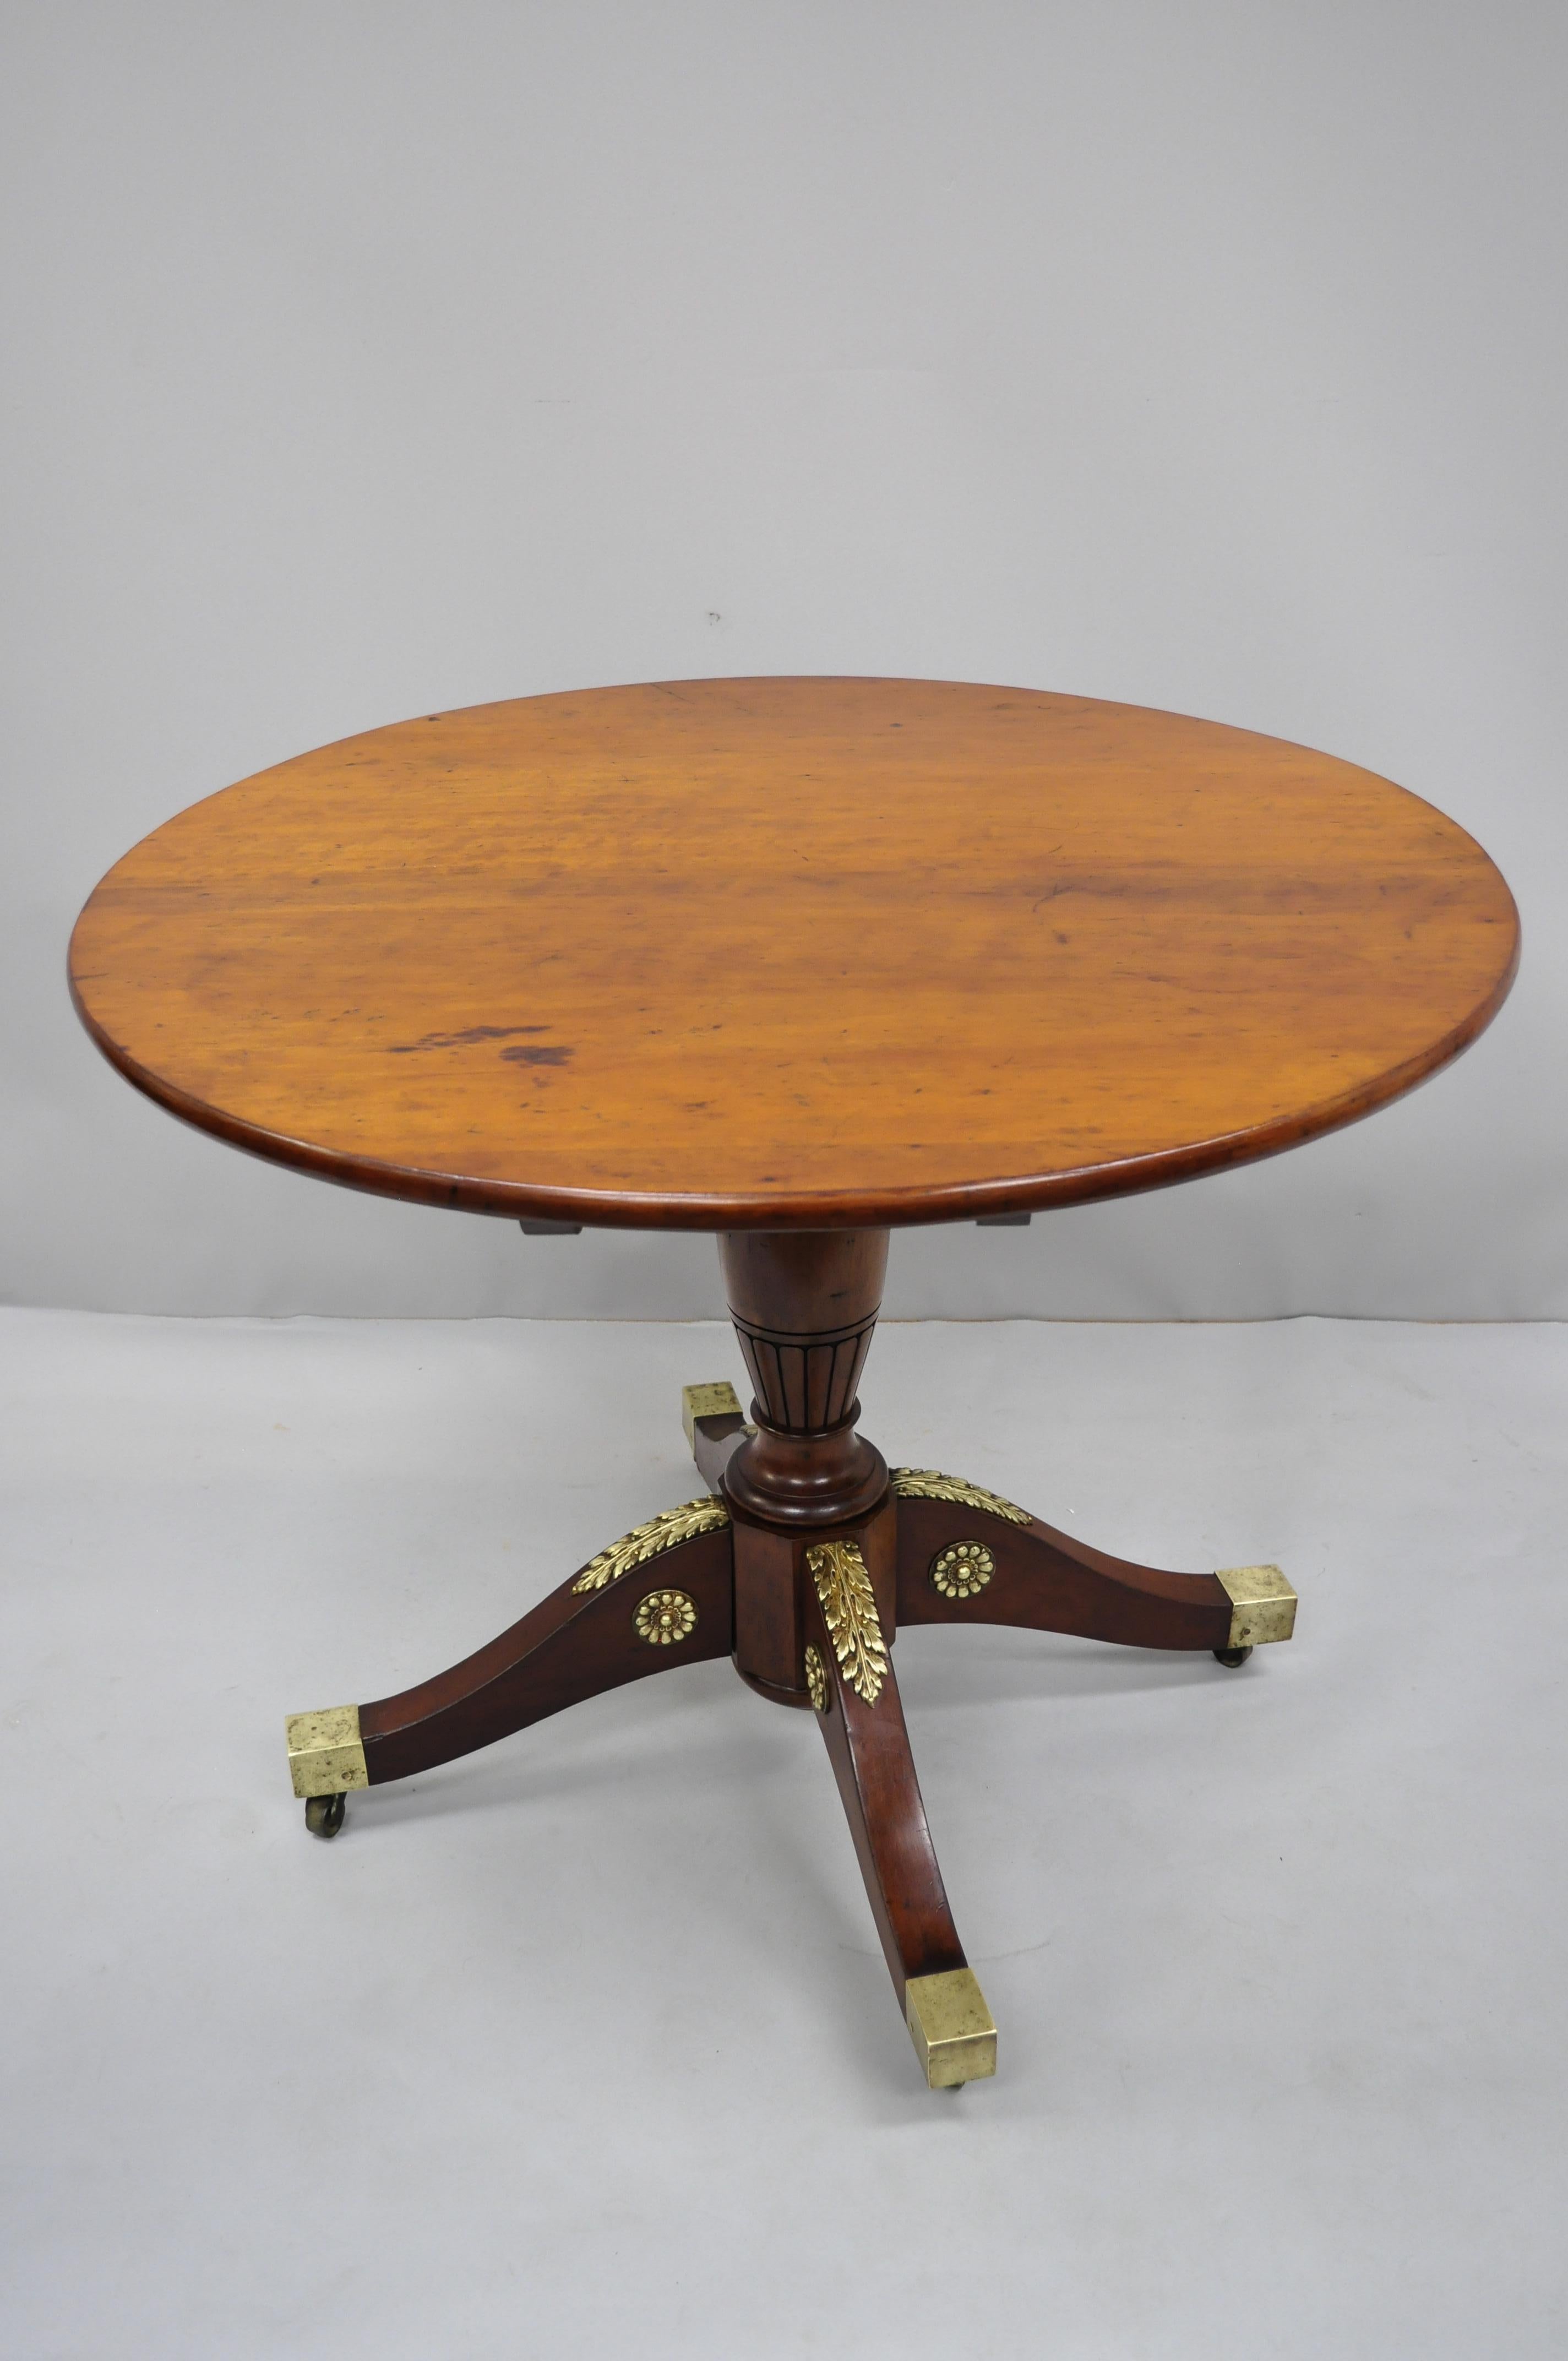 19th century, French Empire style Round mahogany tilt-top table with bronze ormolu. Item features ornate cast bronze ormolu, brass casters, carved central column, beautiful wood grain, very nice antique item, quality craftsmanship, circa 19th